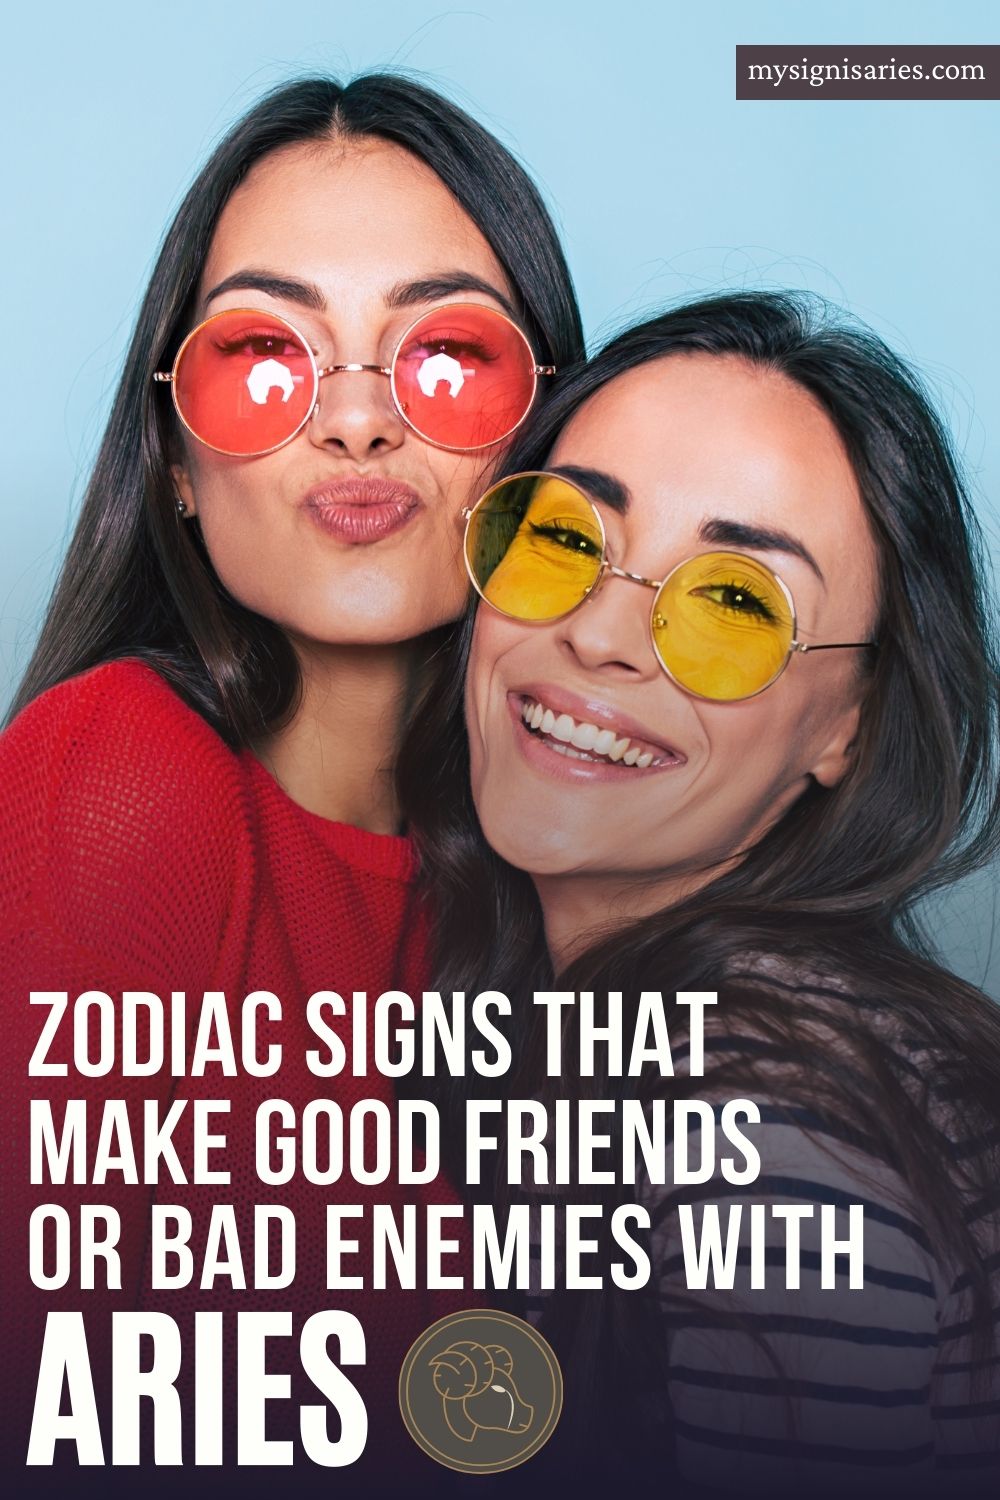 Zodiac Signs That Make Good Friends or Bad Enemies for an Aries